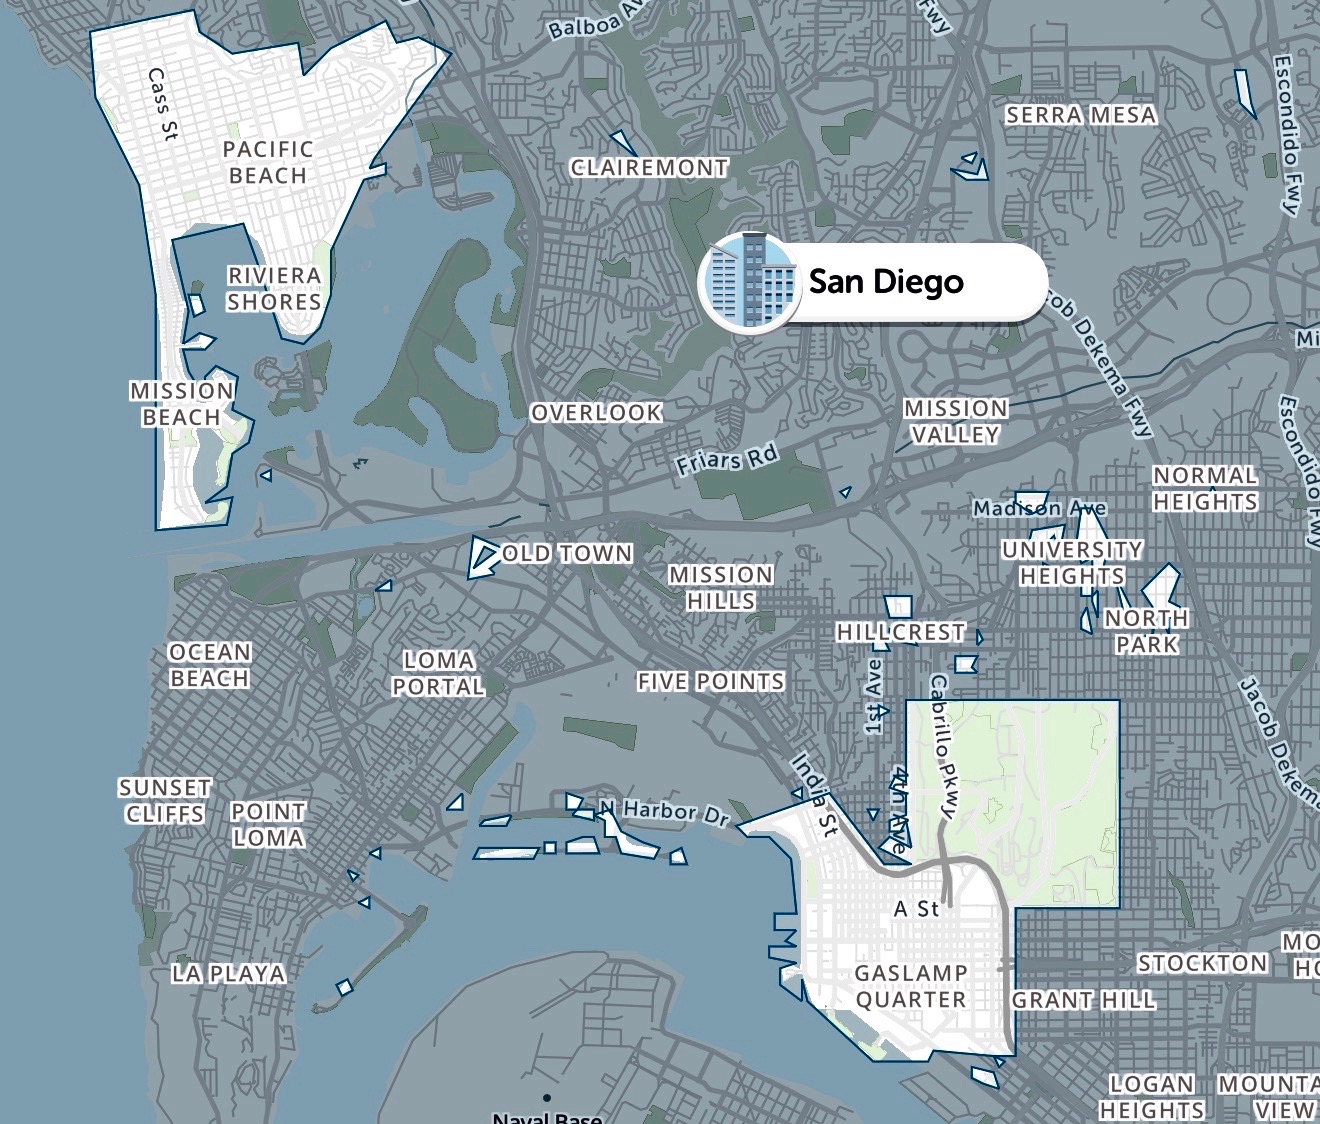 SpotAngels coverage area is shown in white on the map. Downtown San Diego, Balboa Park, Pacific Beach and Mission Beach are fully covered. The map is crowdsourced so as more people join and contribute, the coverage will grow like it did in San Francisco, New York City and many other cities, according to SpotAngels.